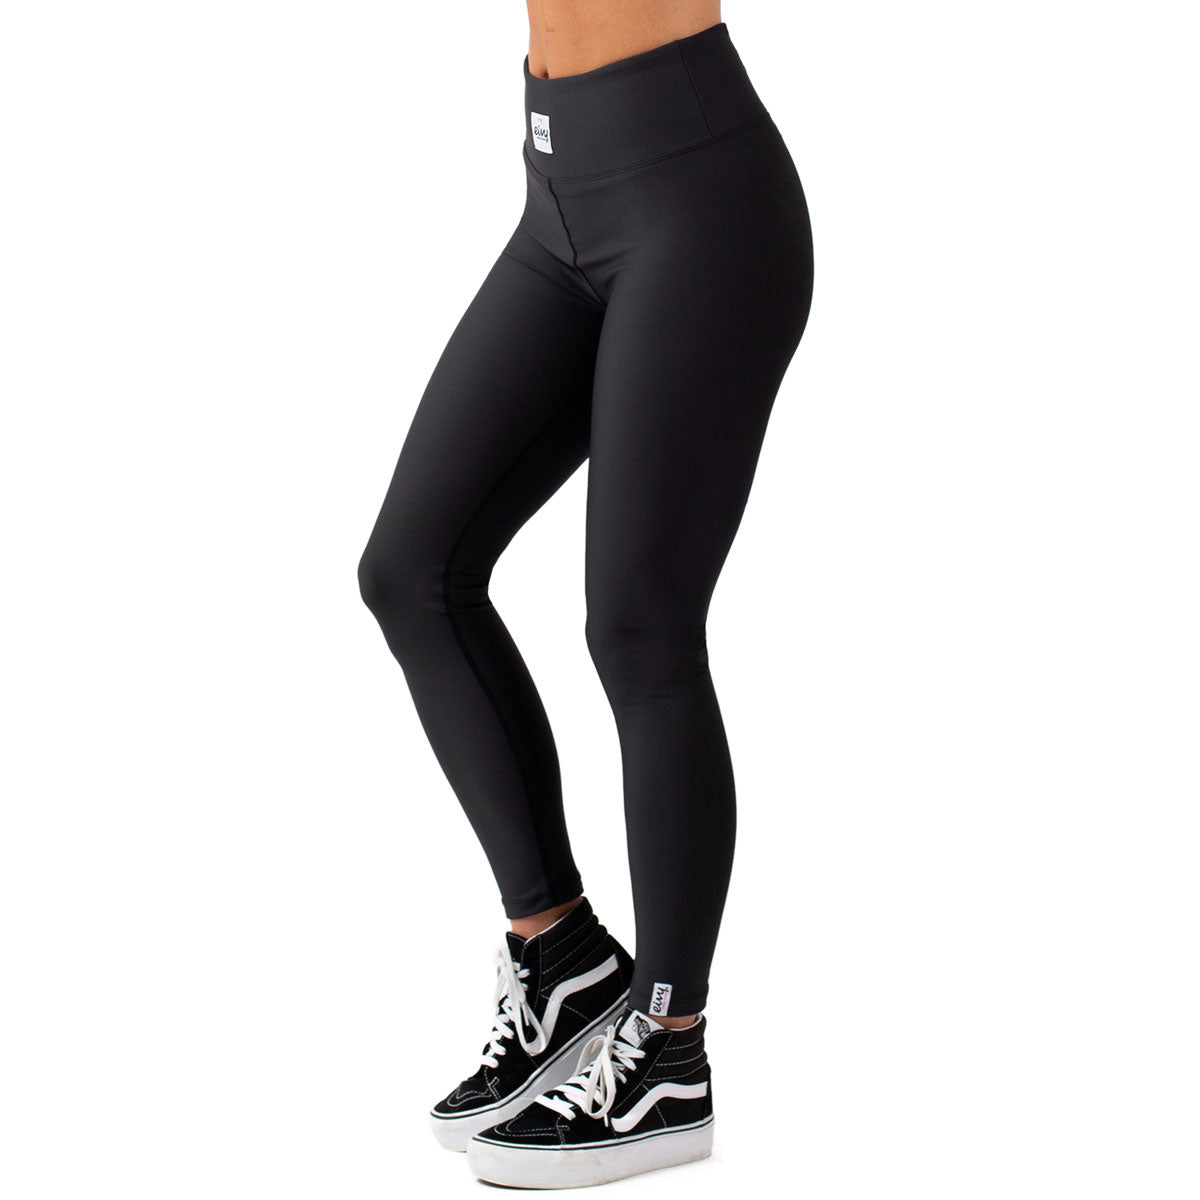 Eivy Icecold Tights Snowboard Base Layer - Team Black image 1